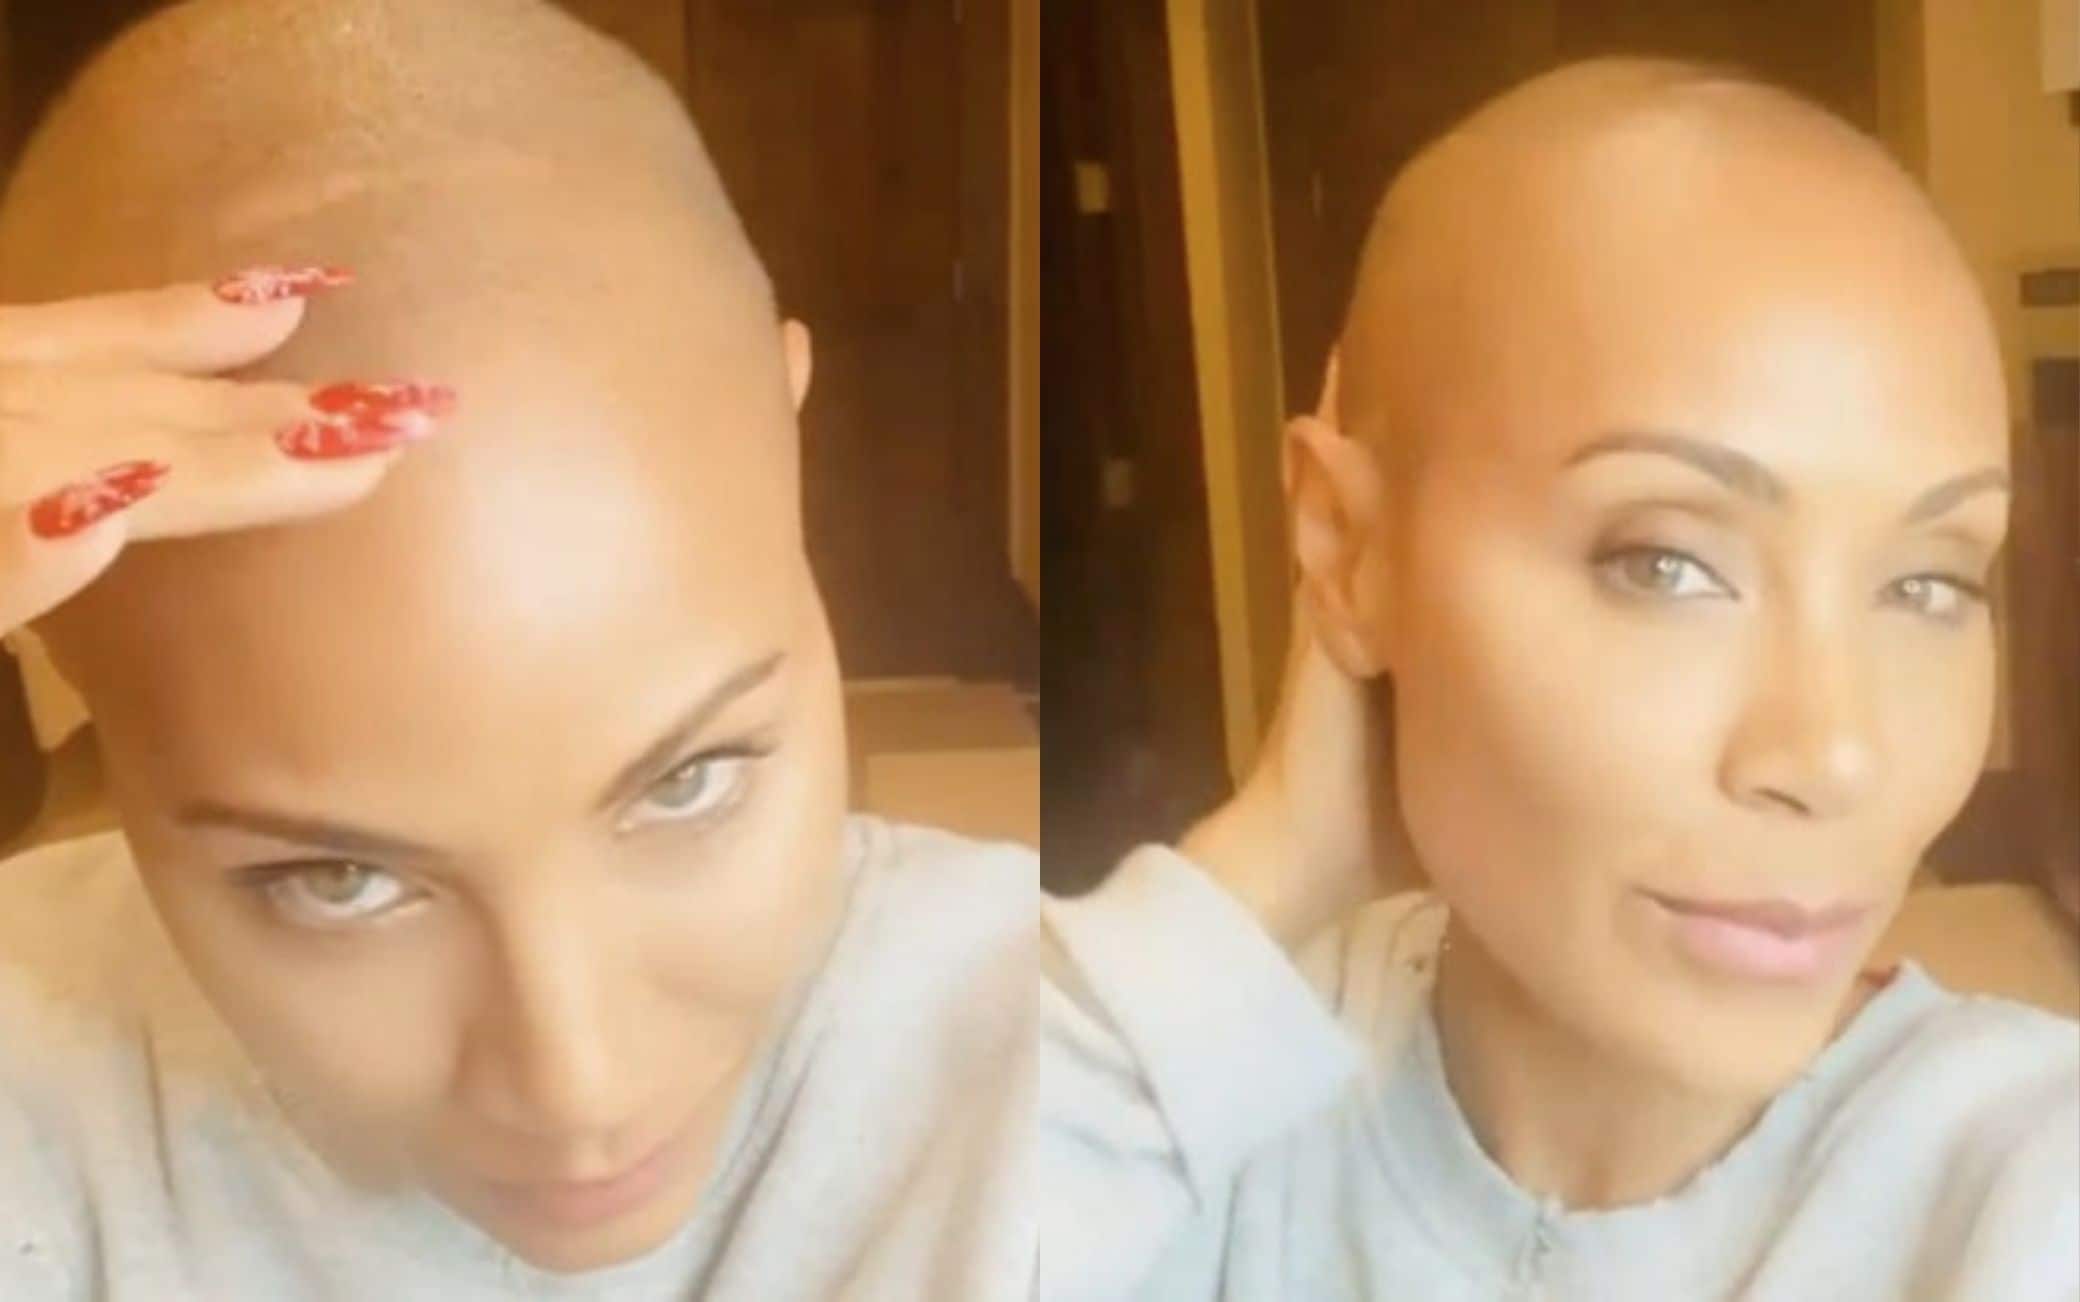 Jada Pinkett Smith, the unfiltered video to show alopecia